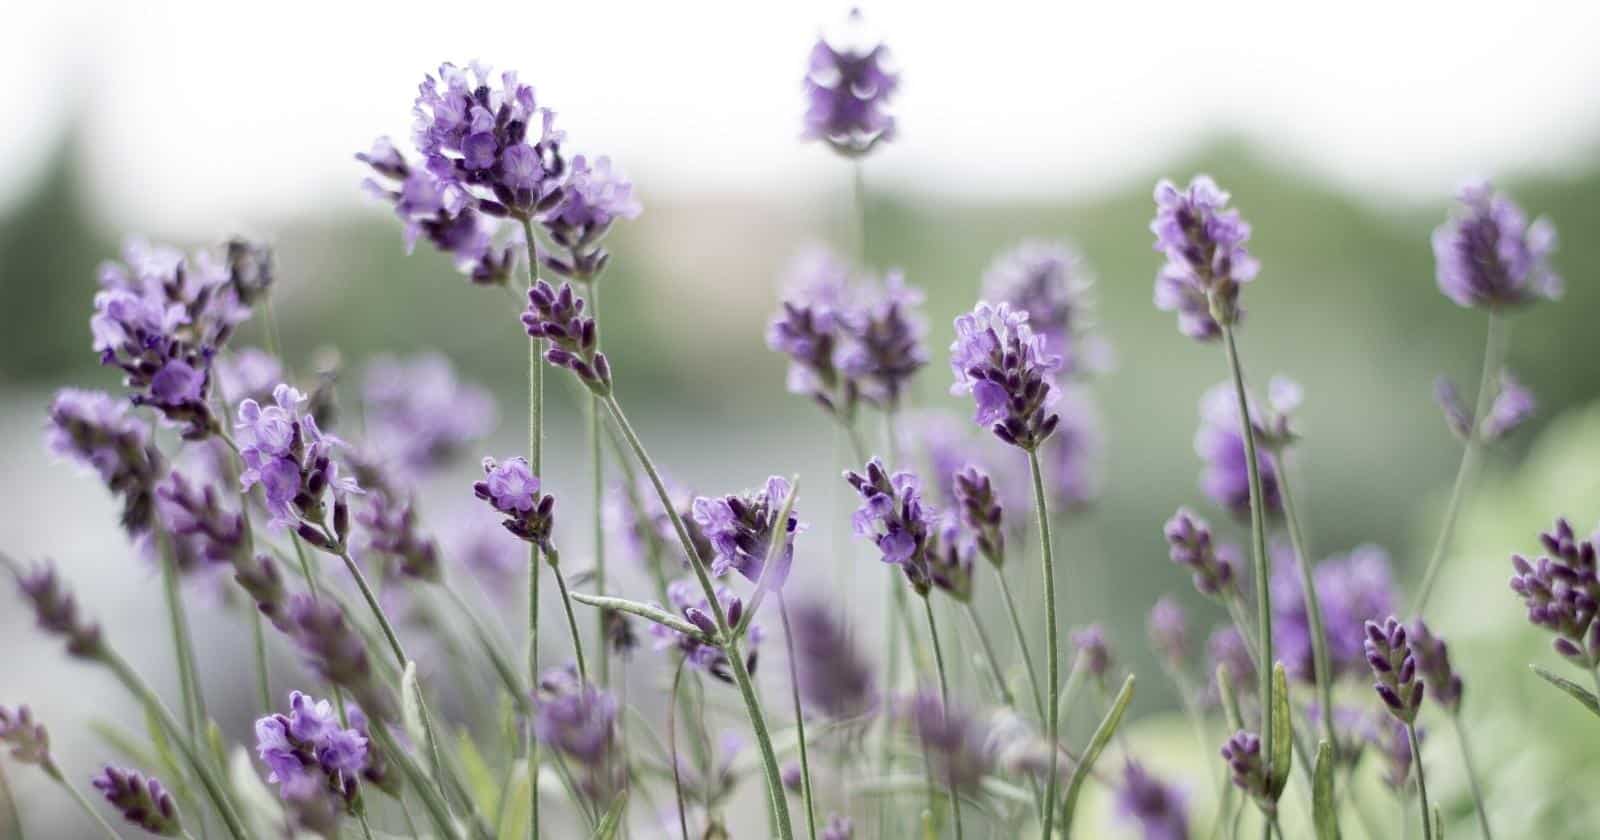 Does Lavender Come Back Each Season, or Does it Die Off in the Winter?